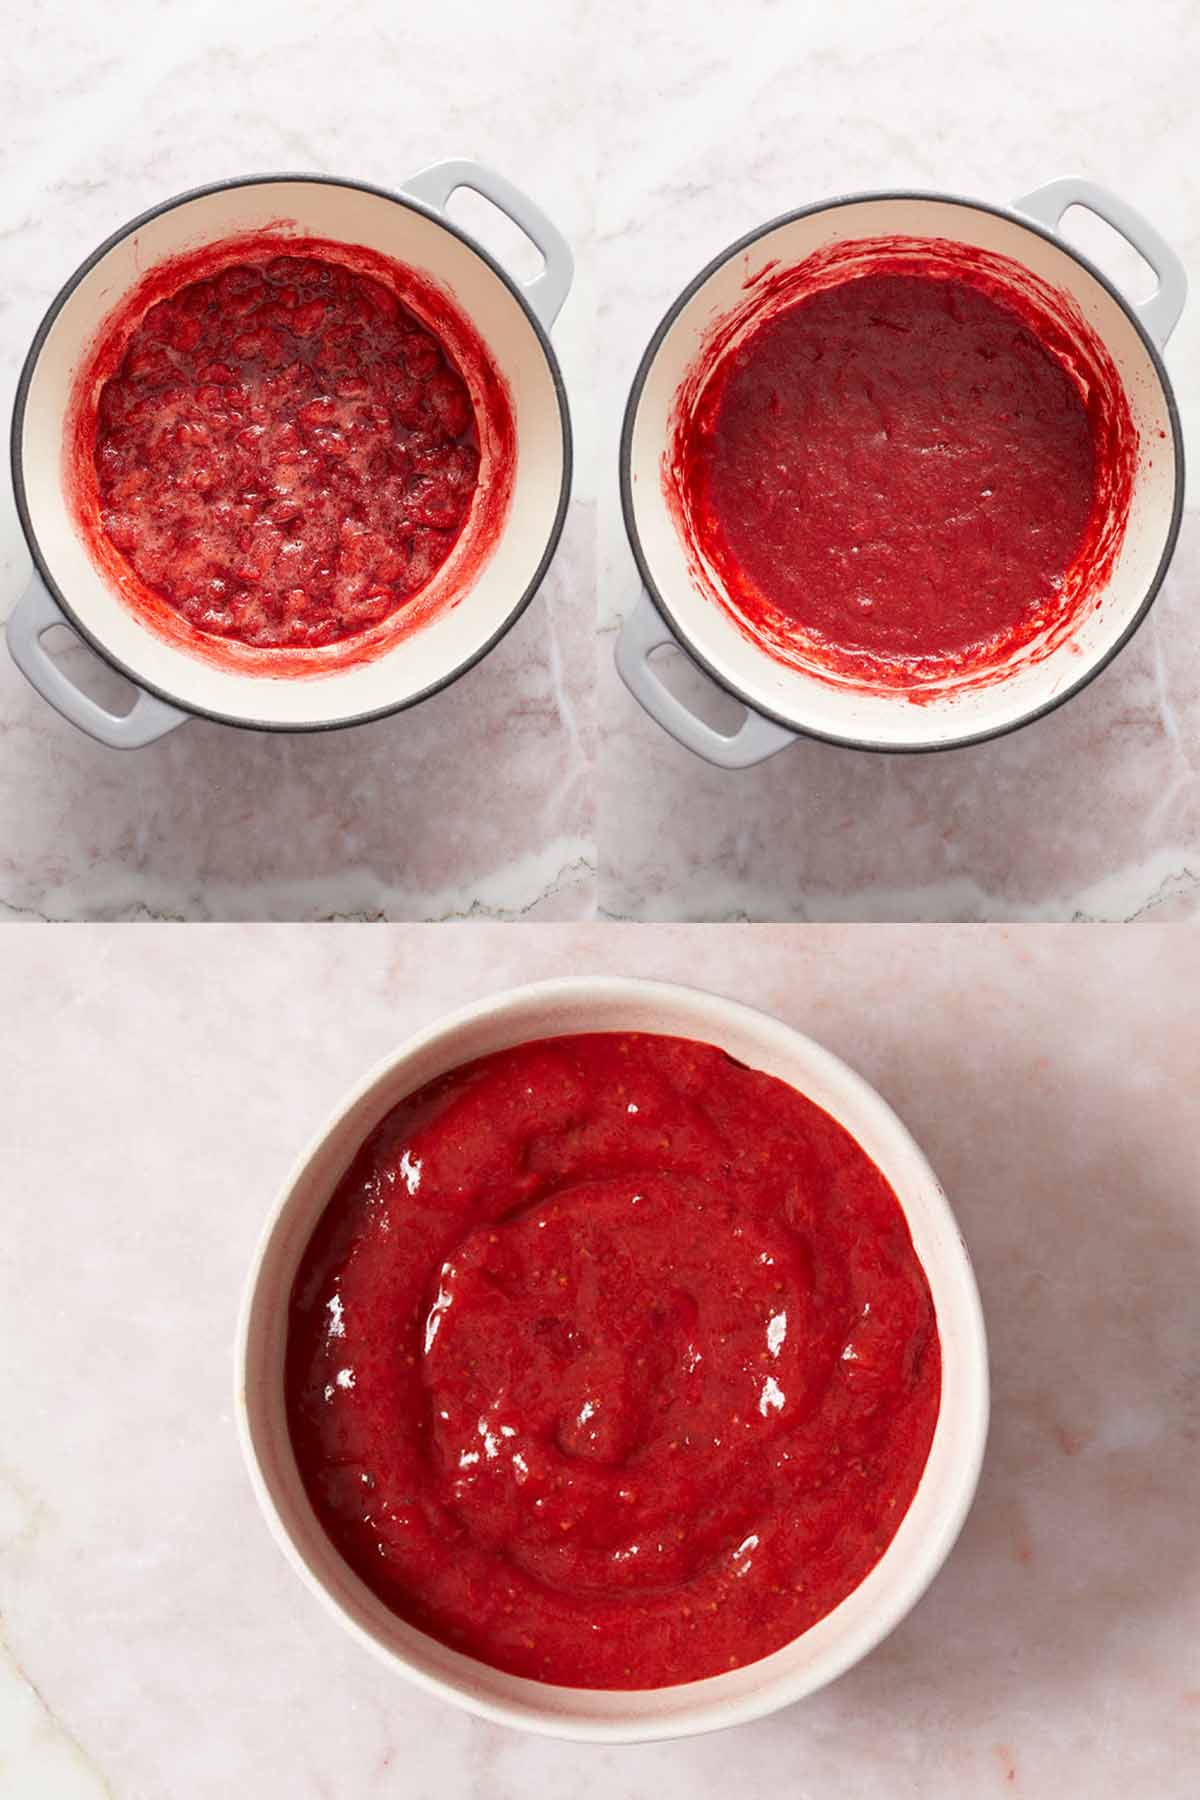 Collage of 3 images showing how the strawberry puree is made.